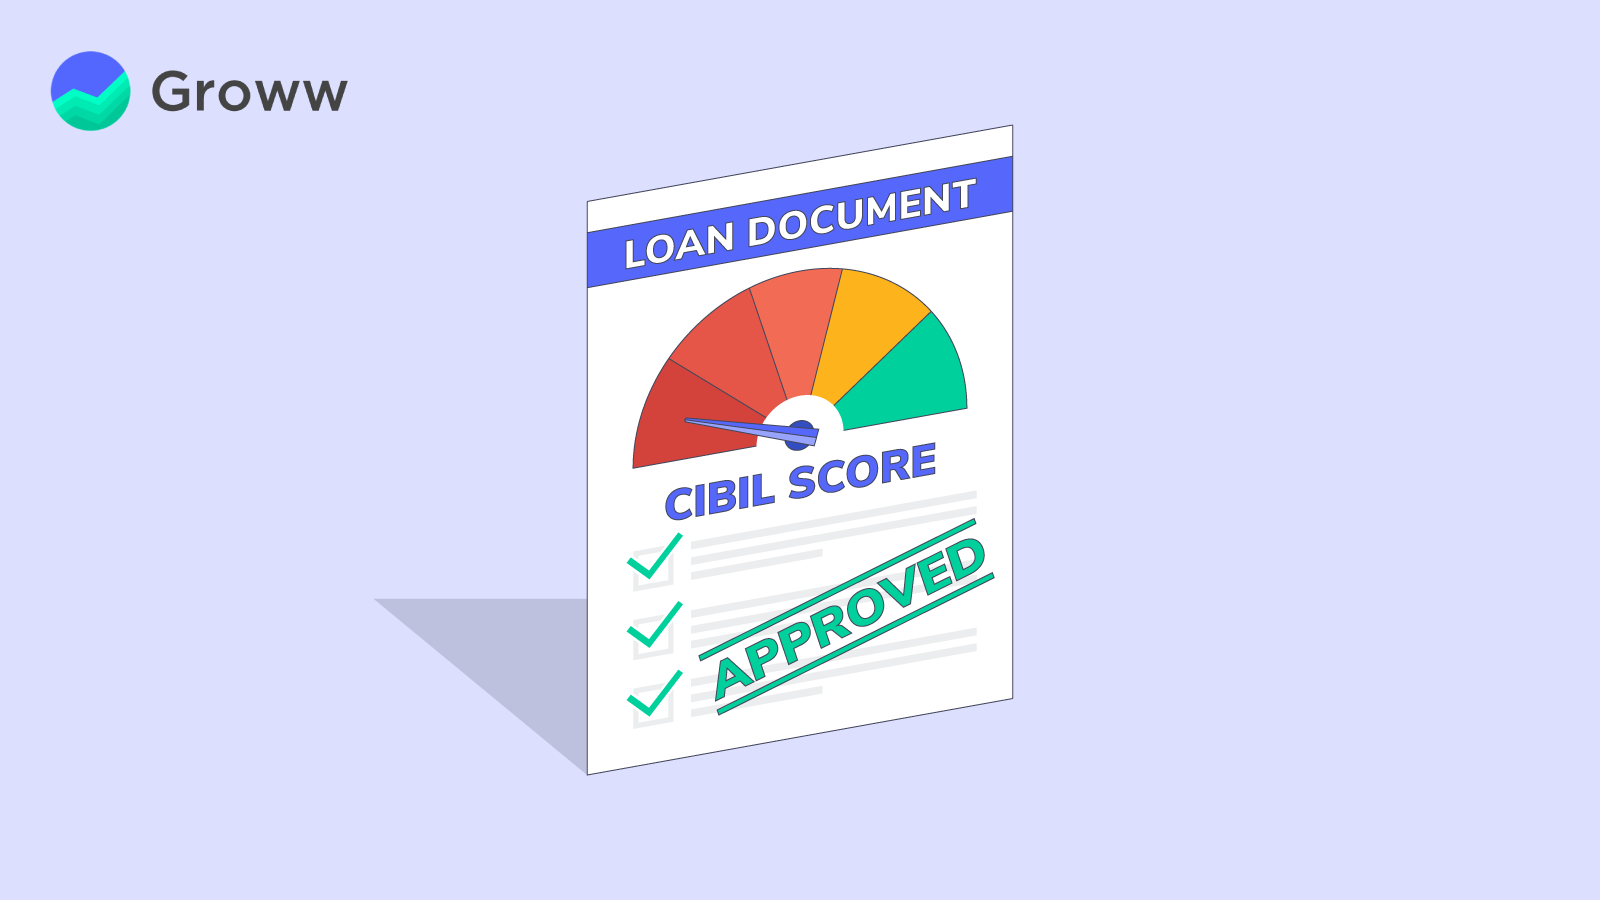 How to Get a Personal Loan for a Low CIBIL Score?